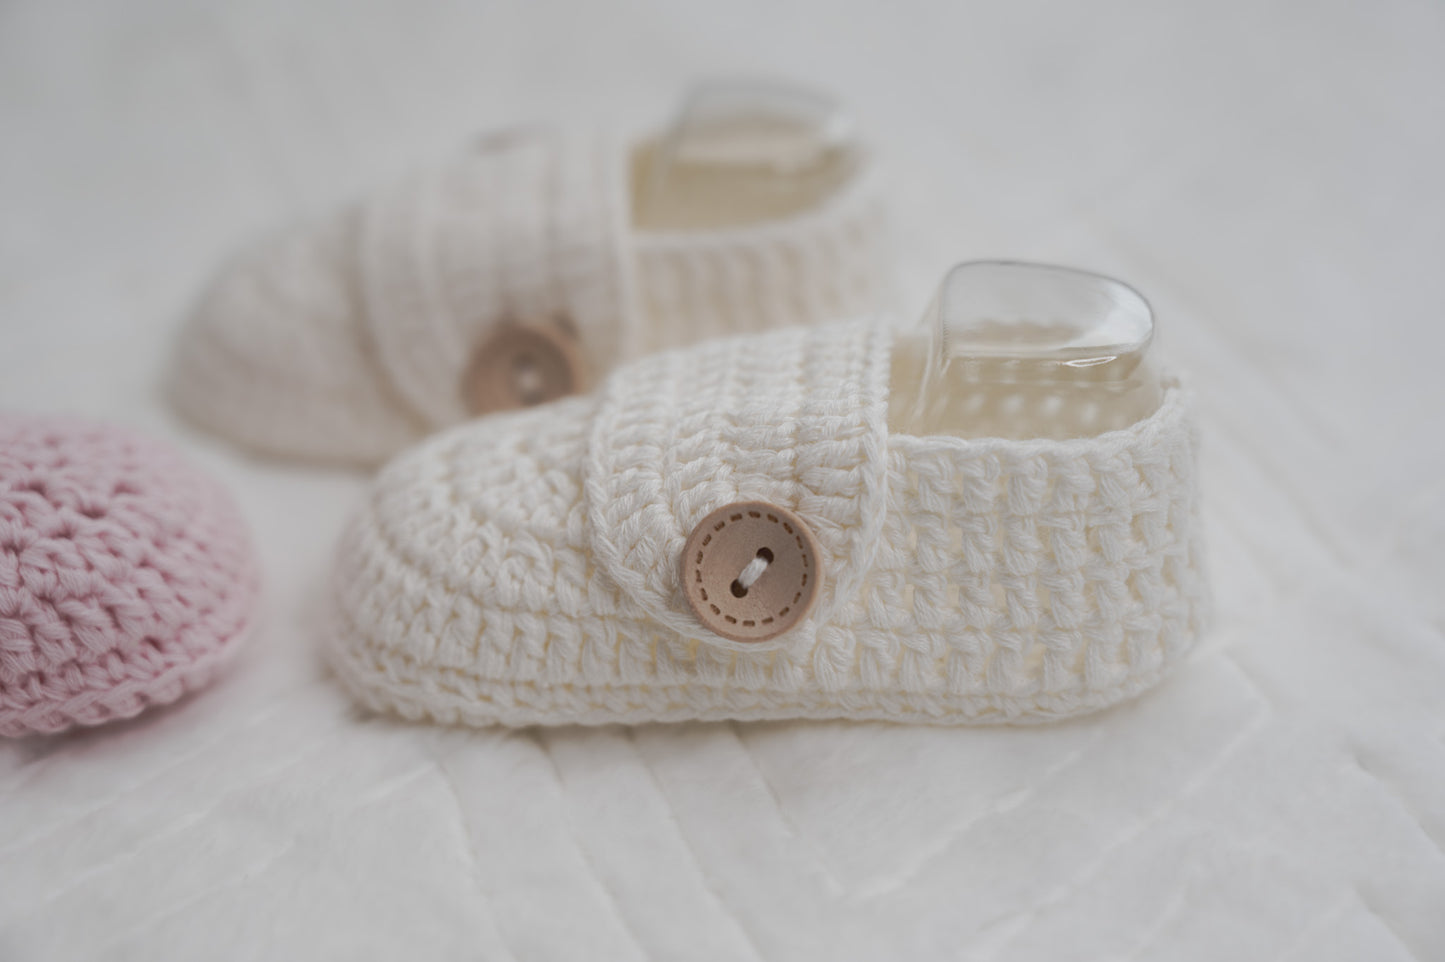 Hand Knitted Crochet 100% Cotton Newborn Baby Booties/ Baby Shoes